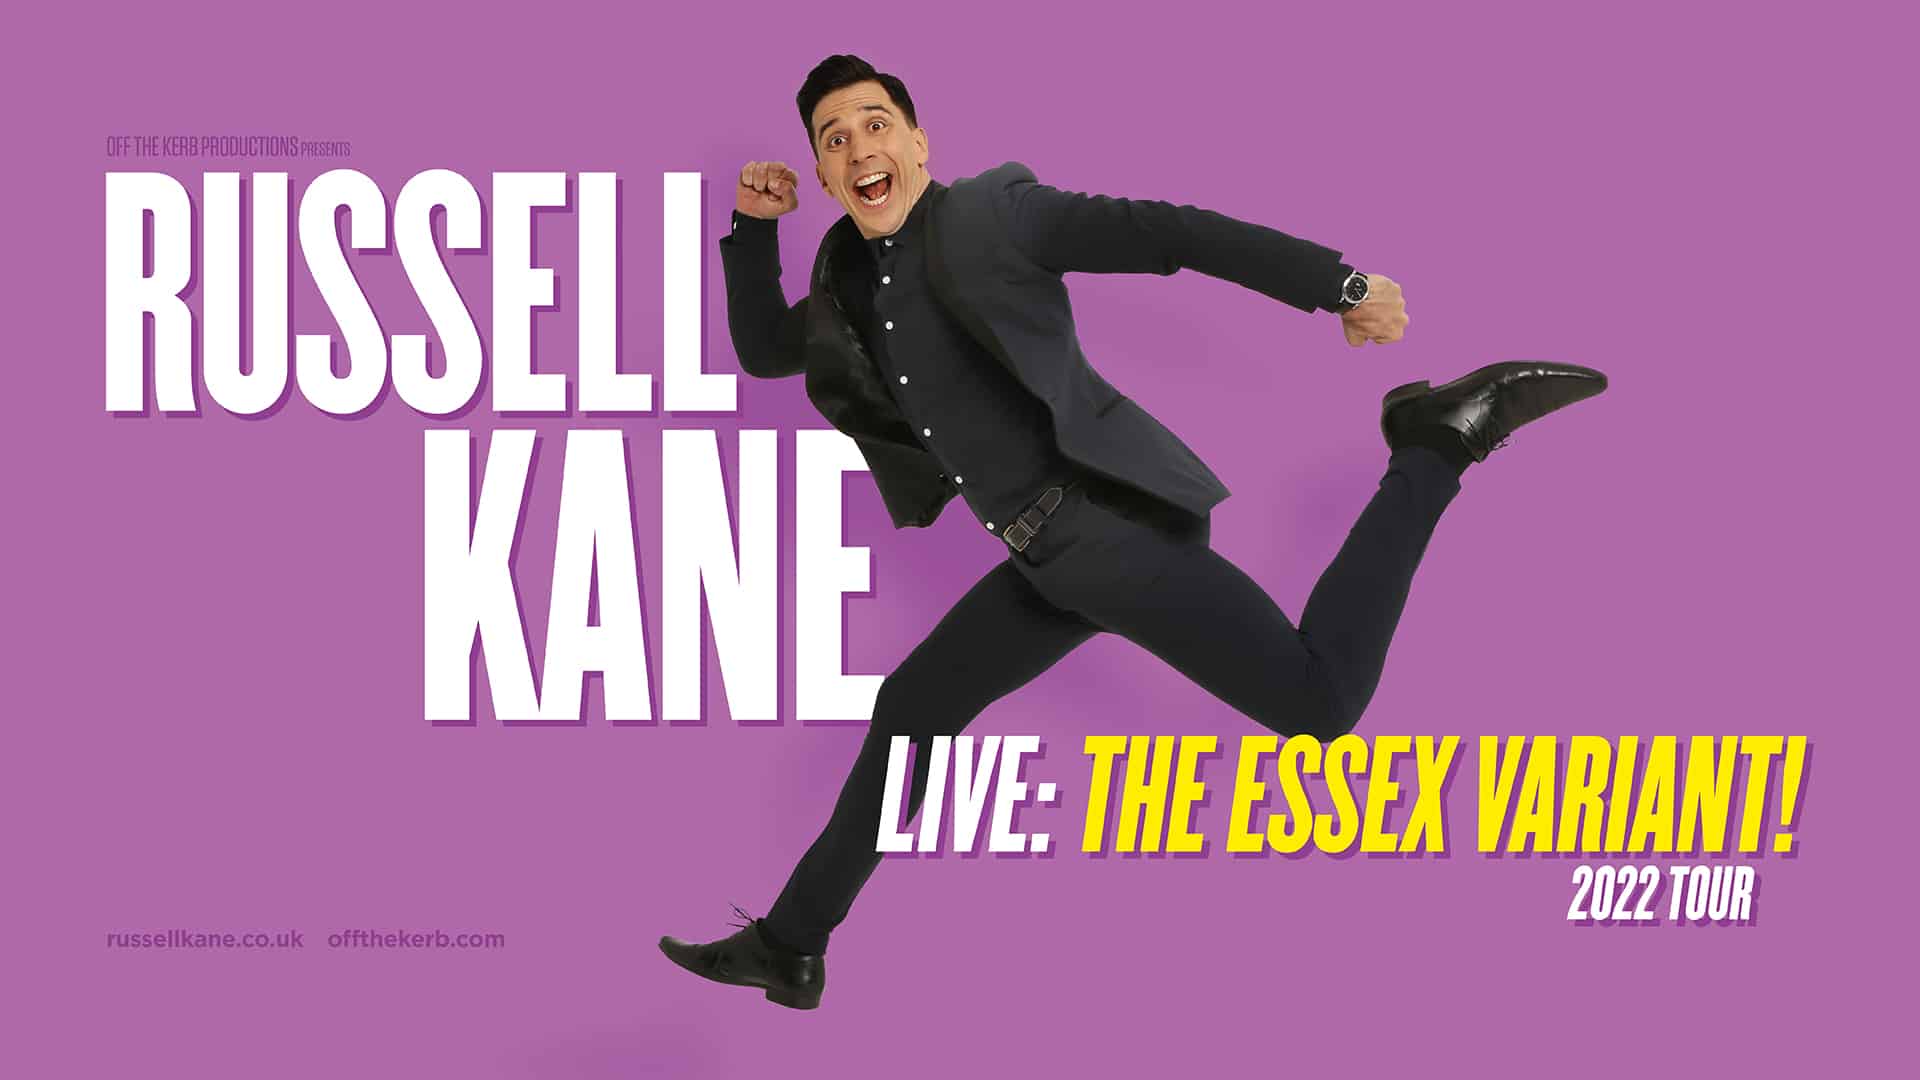 Russell Kane promotional image. Comedian Russell Kane is running comically through the frame, wearing a black suit. The background is purple. Text reads: 'Russell Kane Live: The Essex Variant UK 2022.'